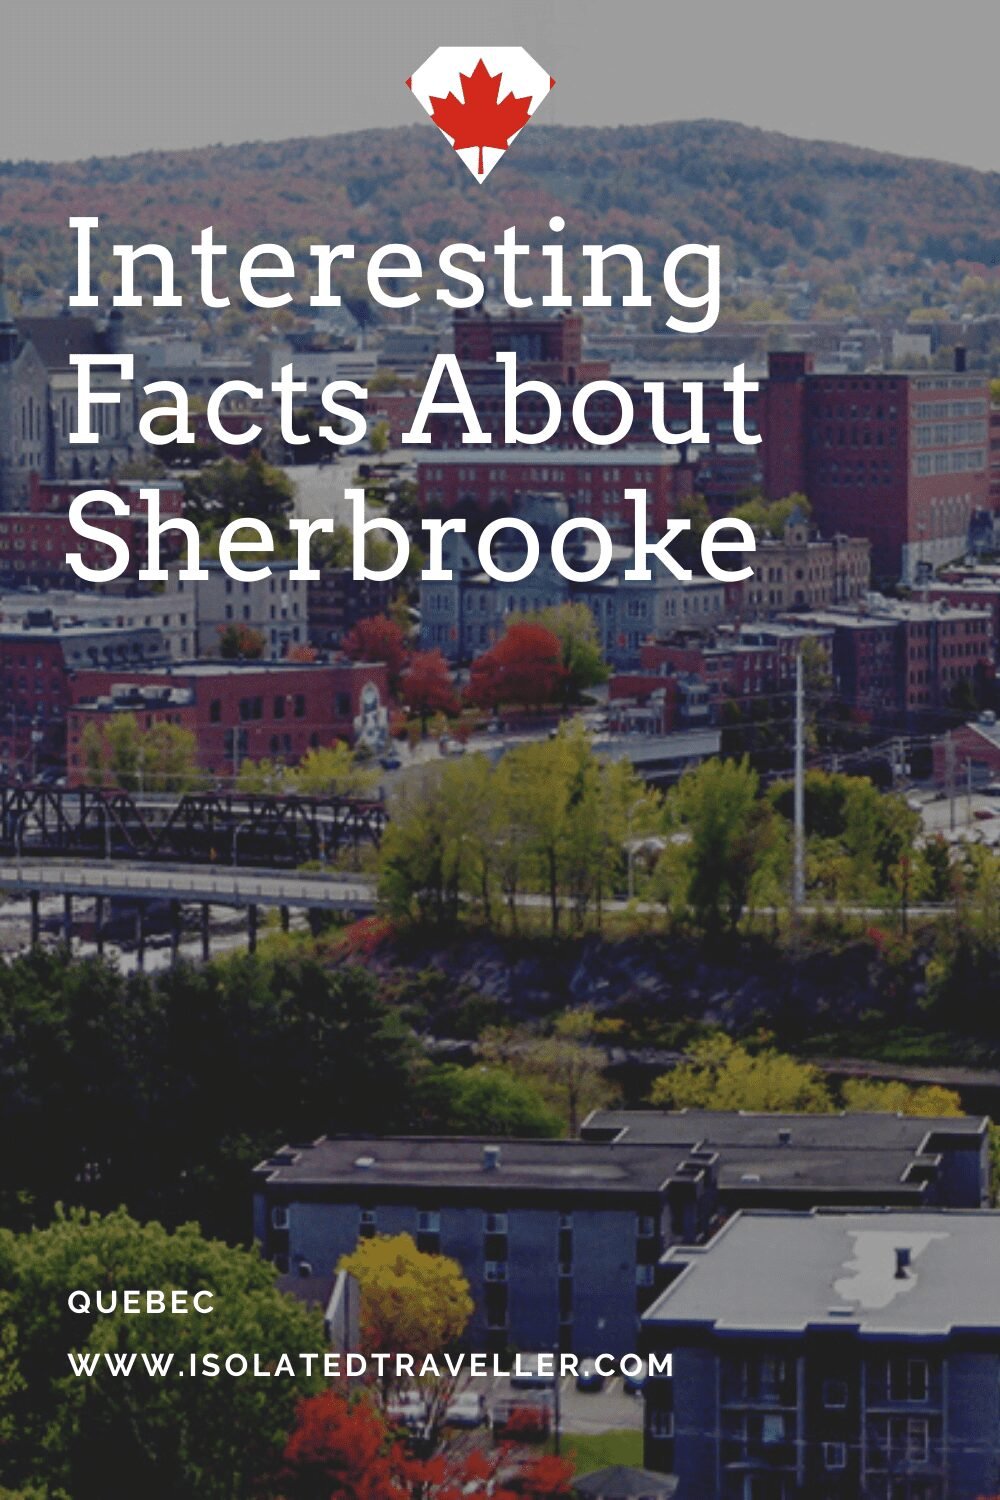 Facts About Sherbrooke